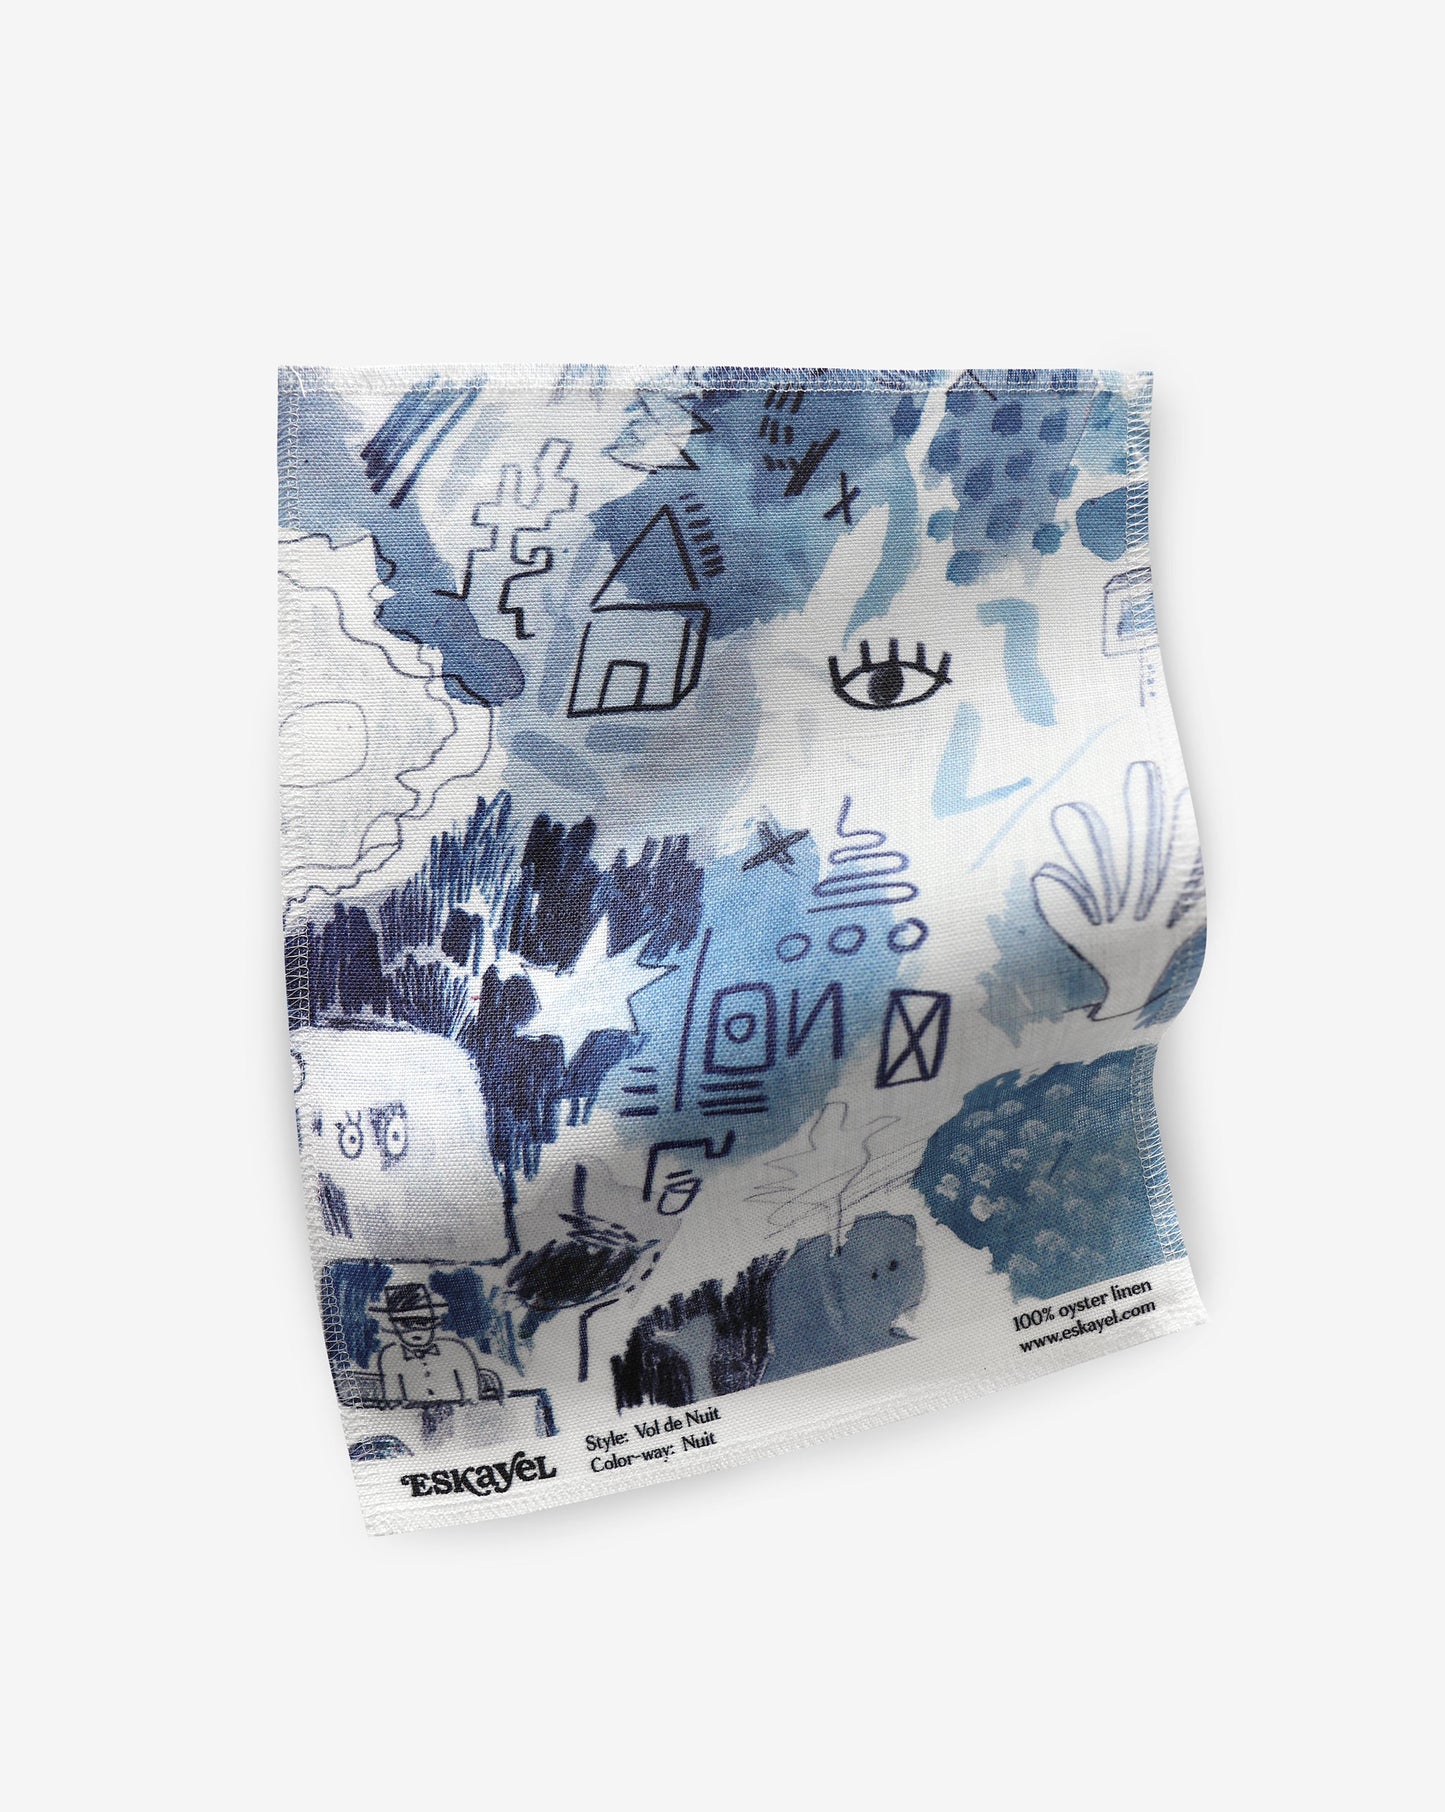 A blue and white paper with drawings on it is a Vol de Nuit Fabric Sample